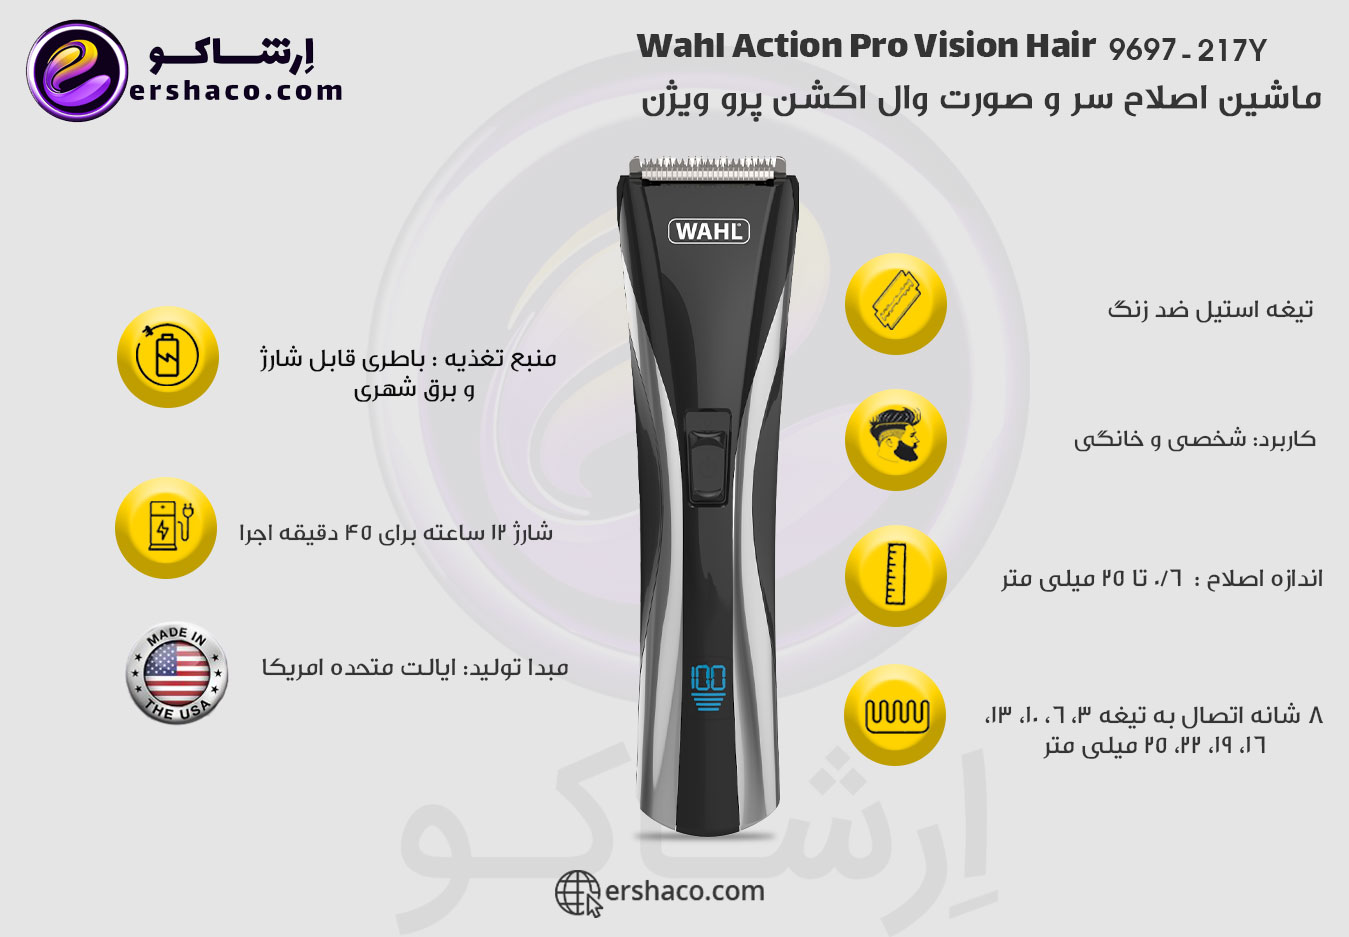 Wahl-9697-217Y-Action-Pro-Vision-Hair-Clipper.jpg